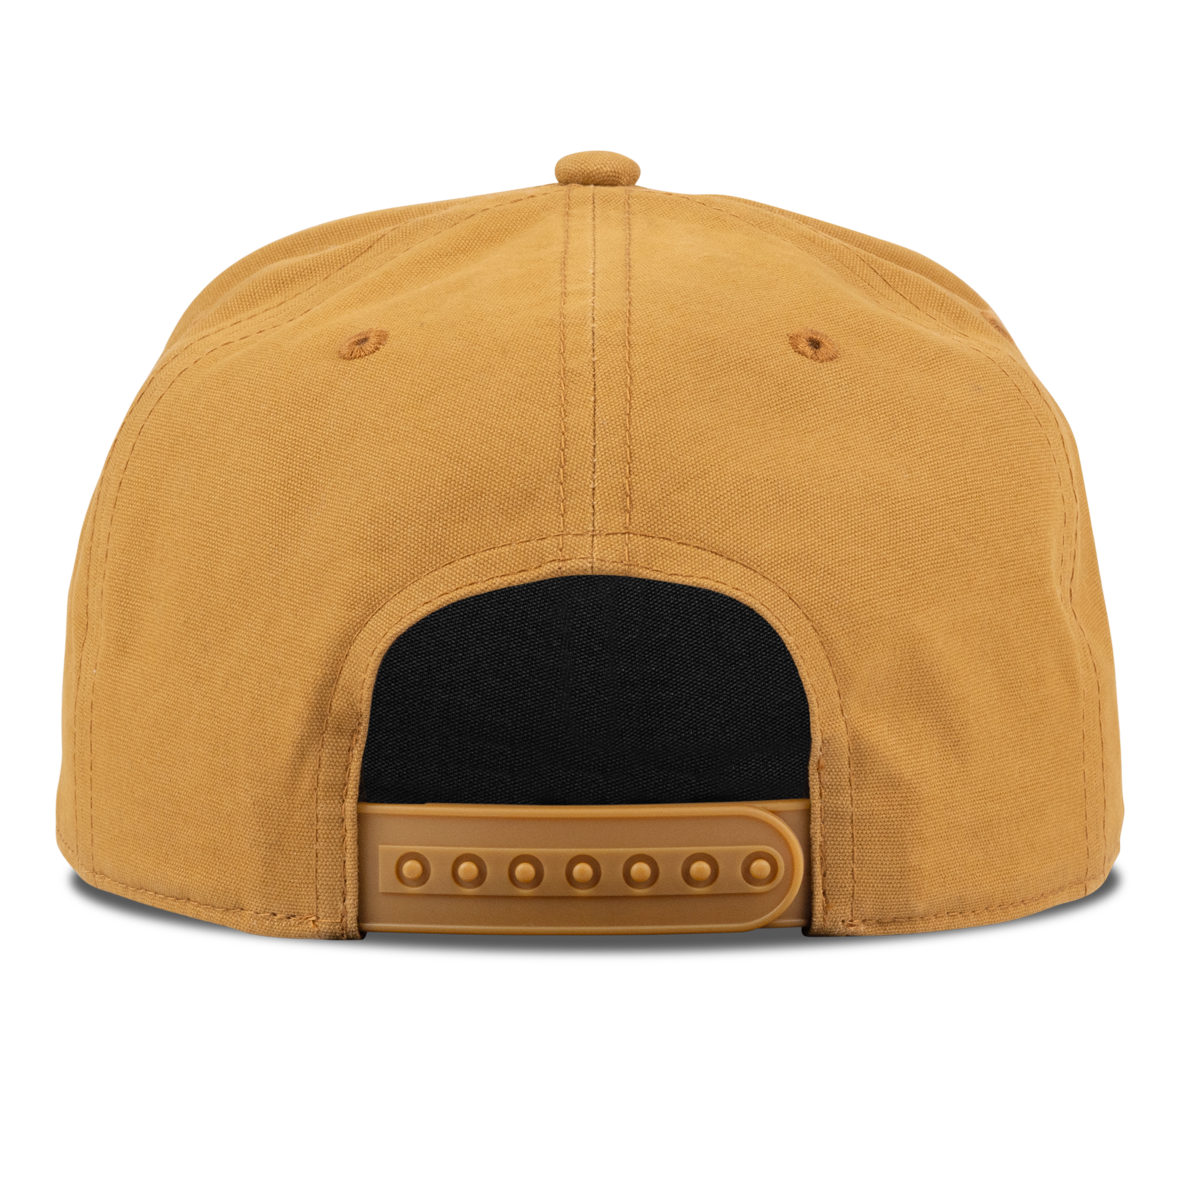 New Mexico 47 Canvas 5 Panel Rope Back Wheat